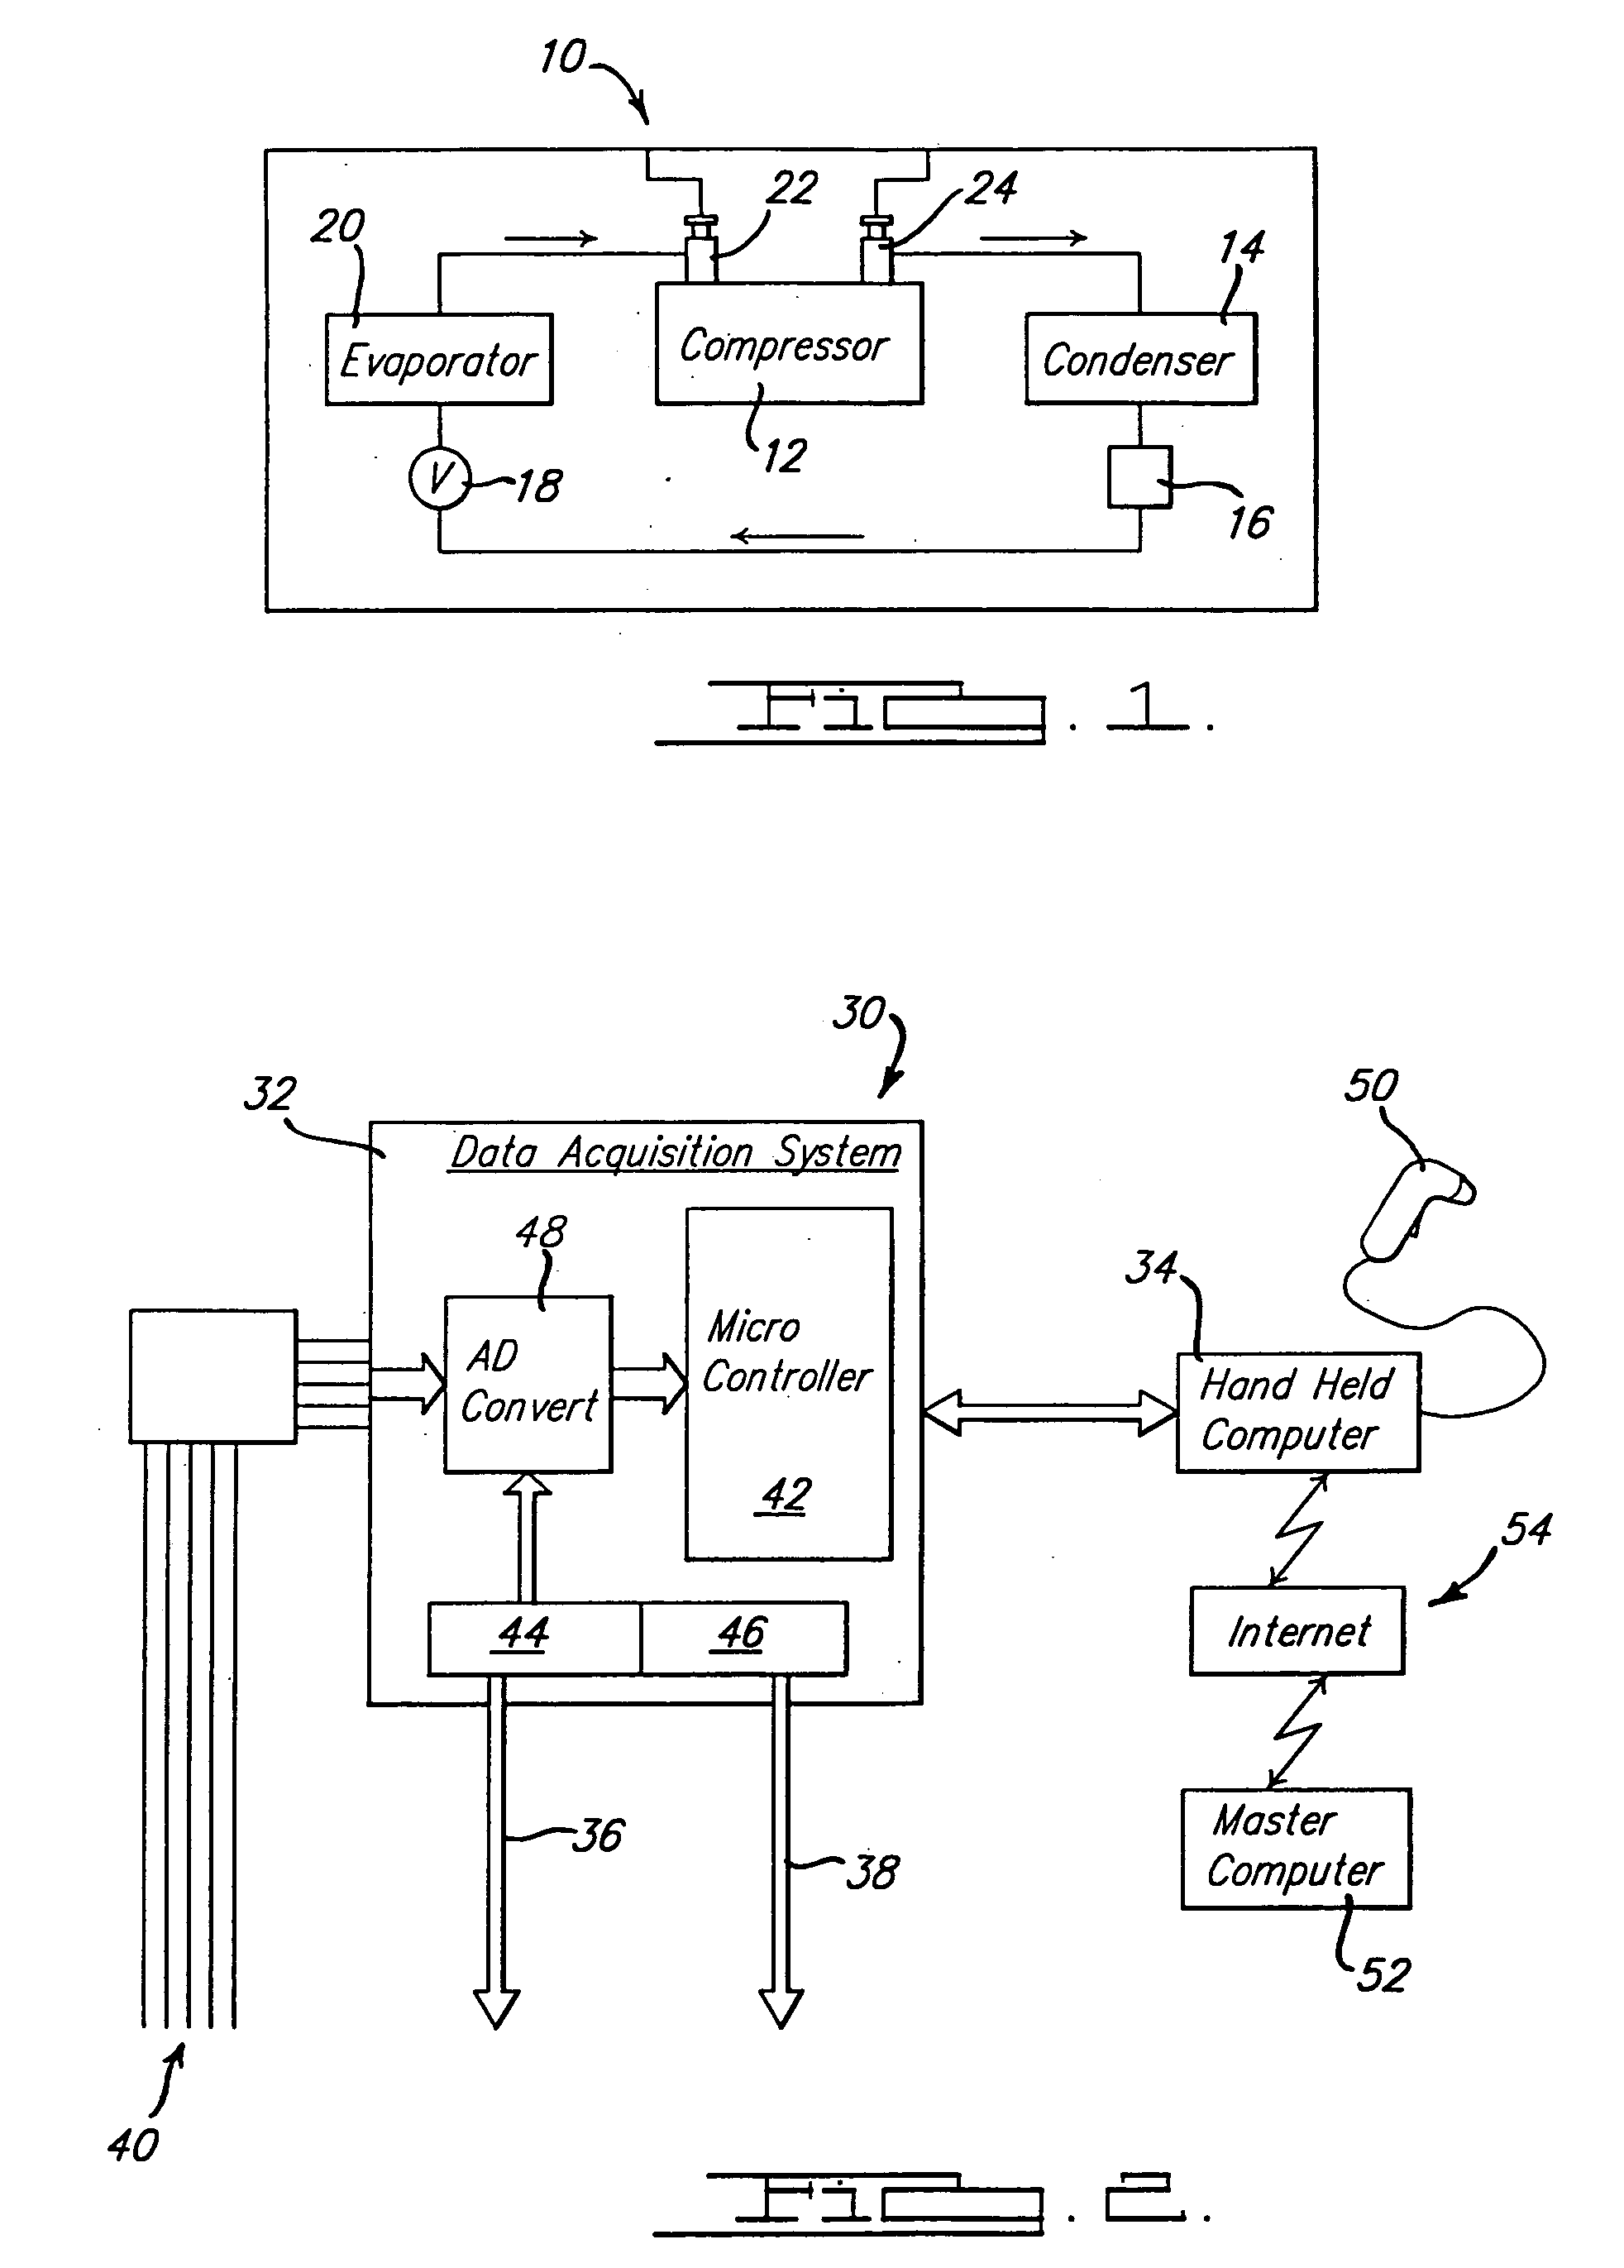 Cooling system diagnostic system apparatus and method